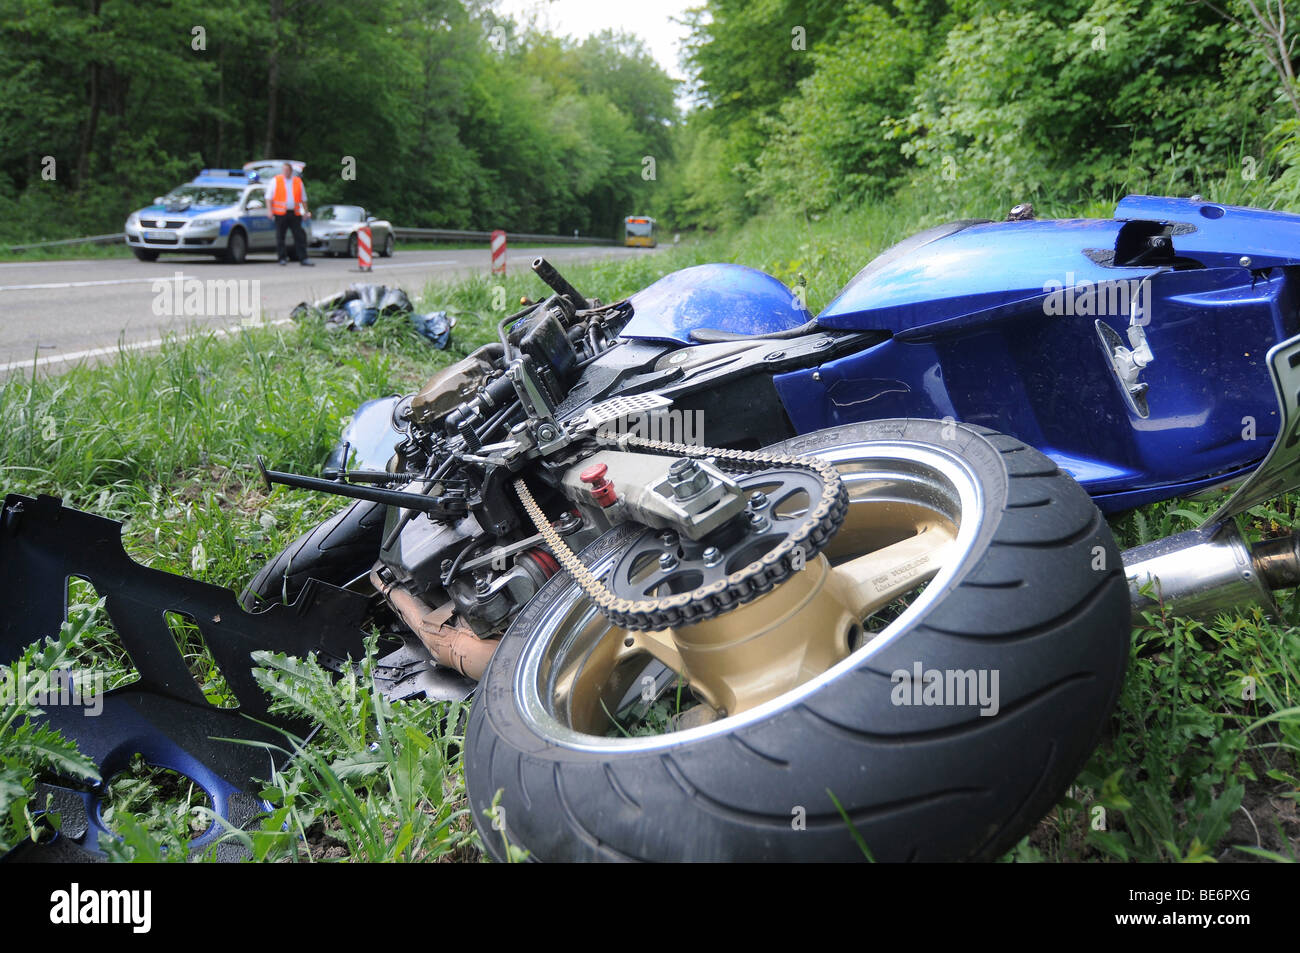 Motorcycle after severe accident, Gerlingen, Baden-Wuerttemberg, Germany, Europe Stock Photo